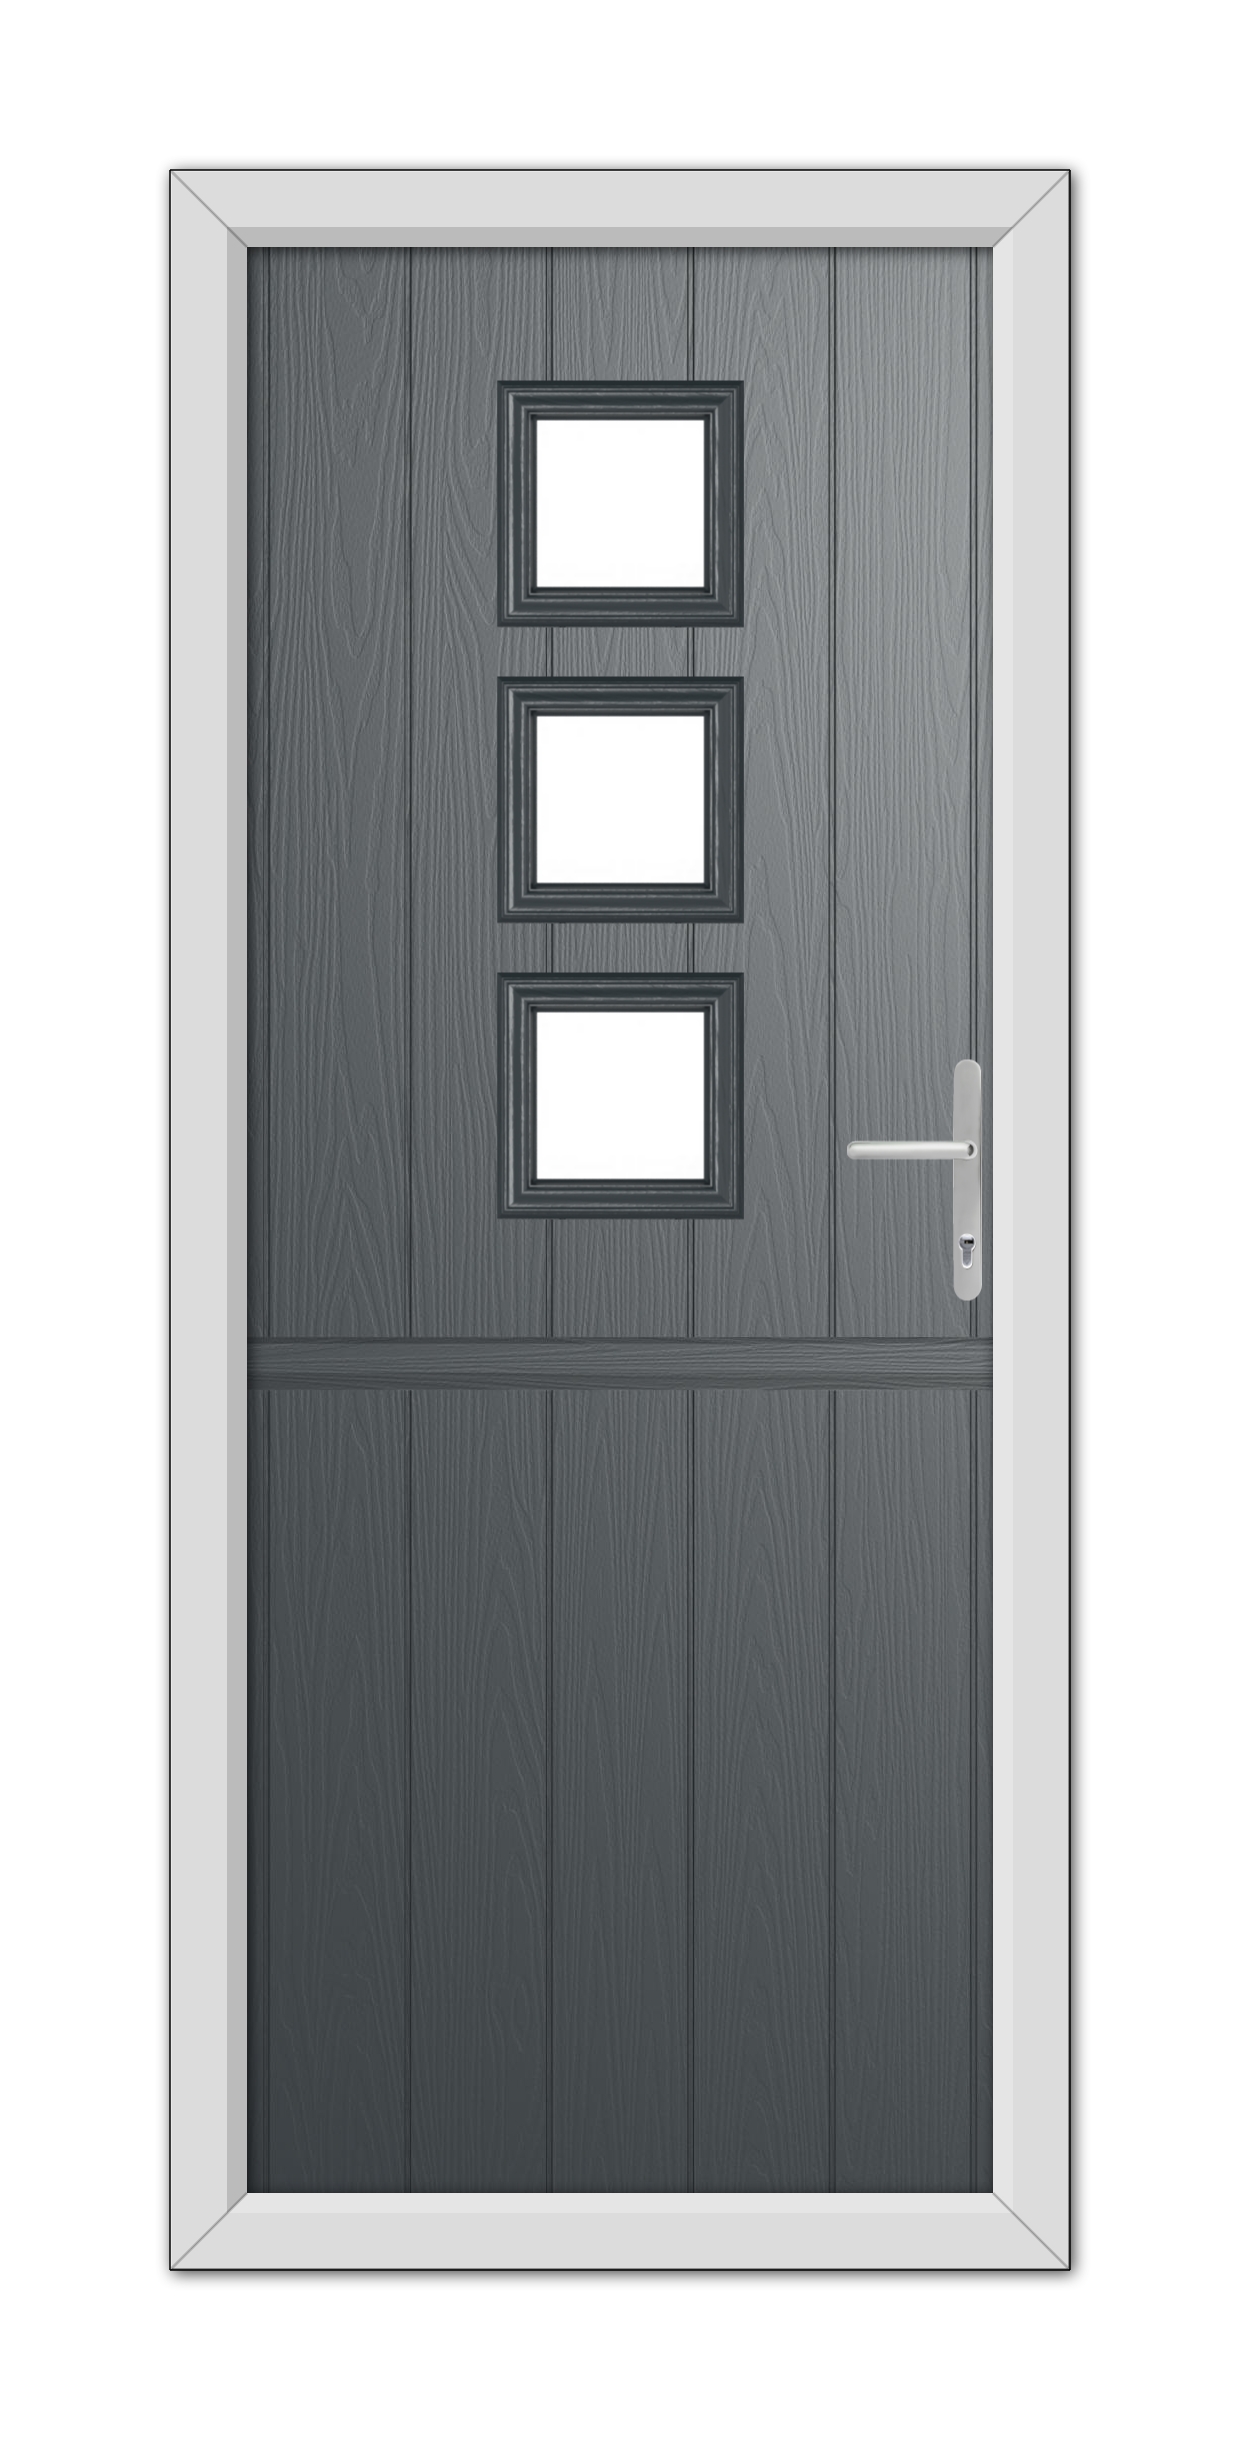 A modern Anthracite Grey Montrose Stable Composite Door 48mm Timber Core with three rectangular windows aligned vertically and a silver handle, set in a white frame.